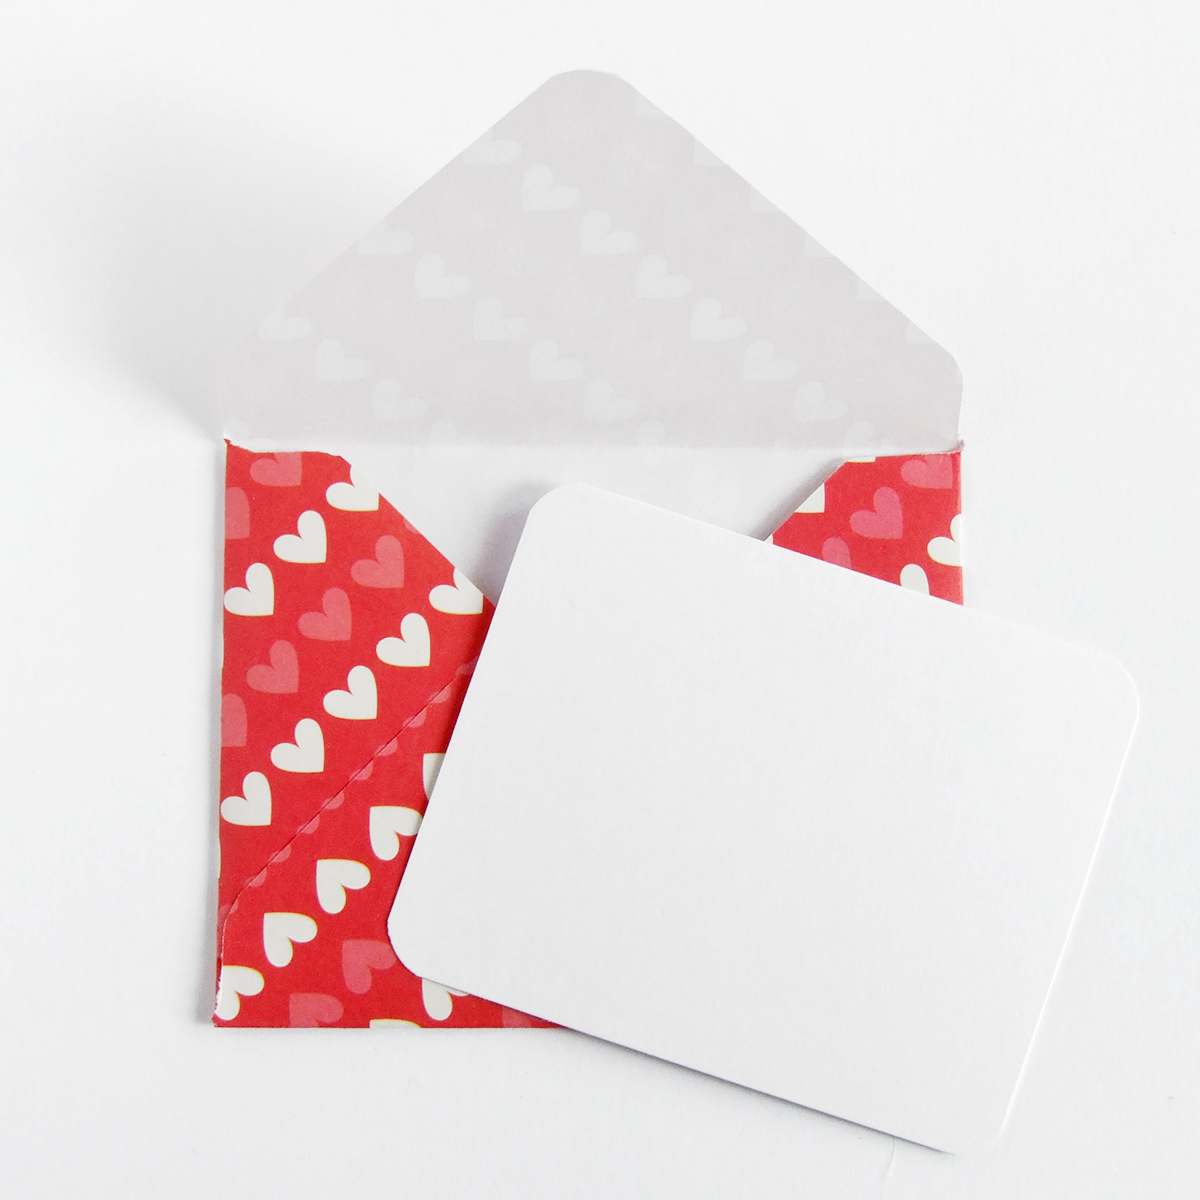 Handmade heart patterned gift message envelope and notecard